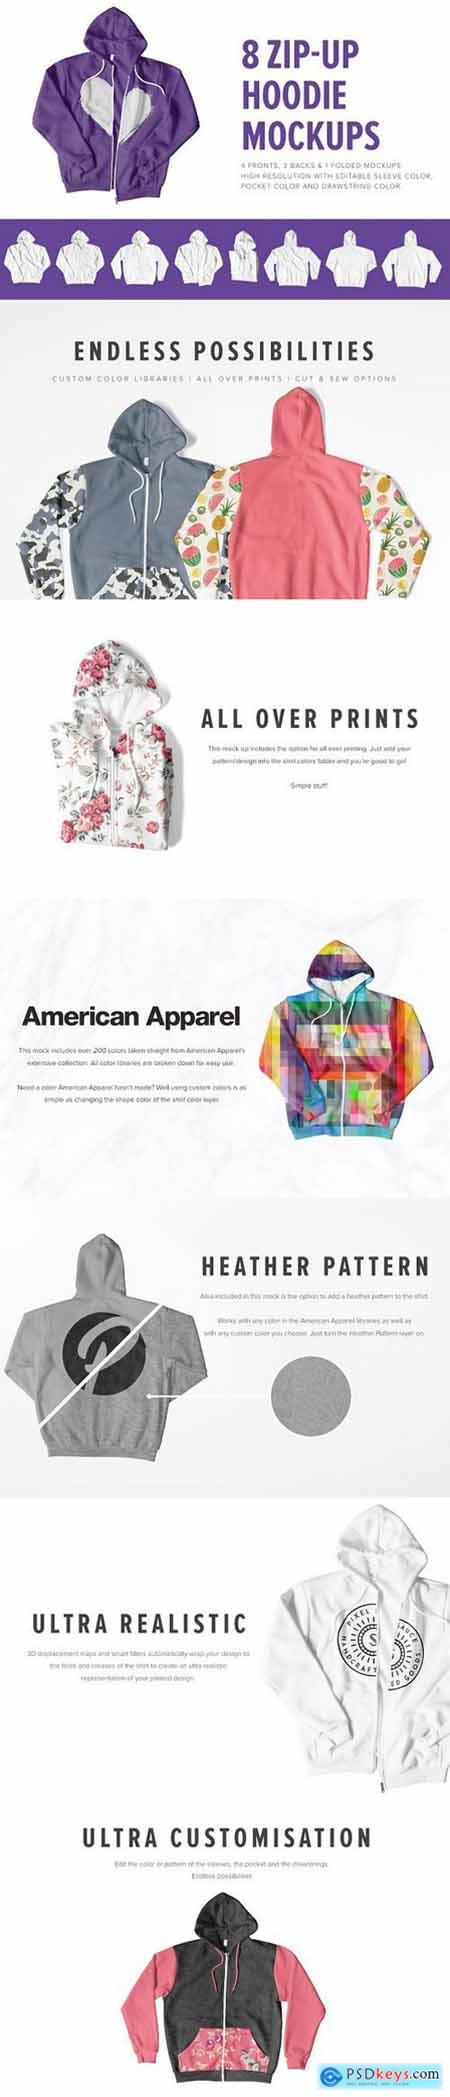 Apparel » page 10 » Free Download Photoshop Vector Stock image Via ...